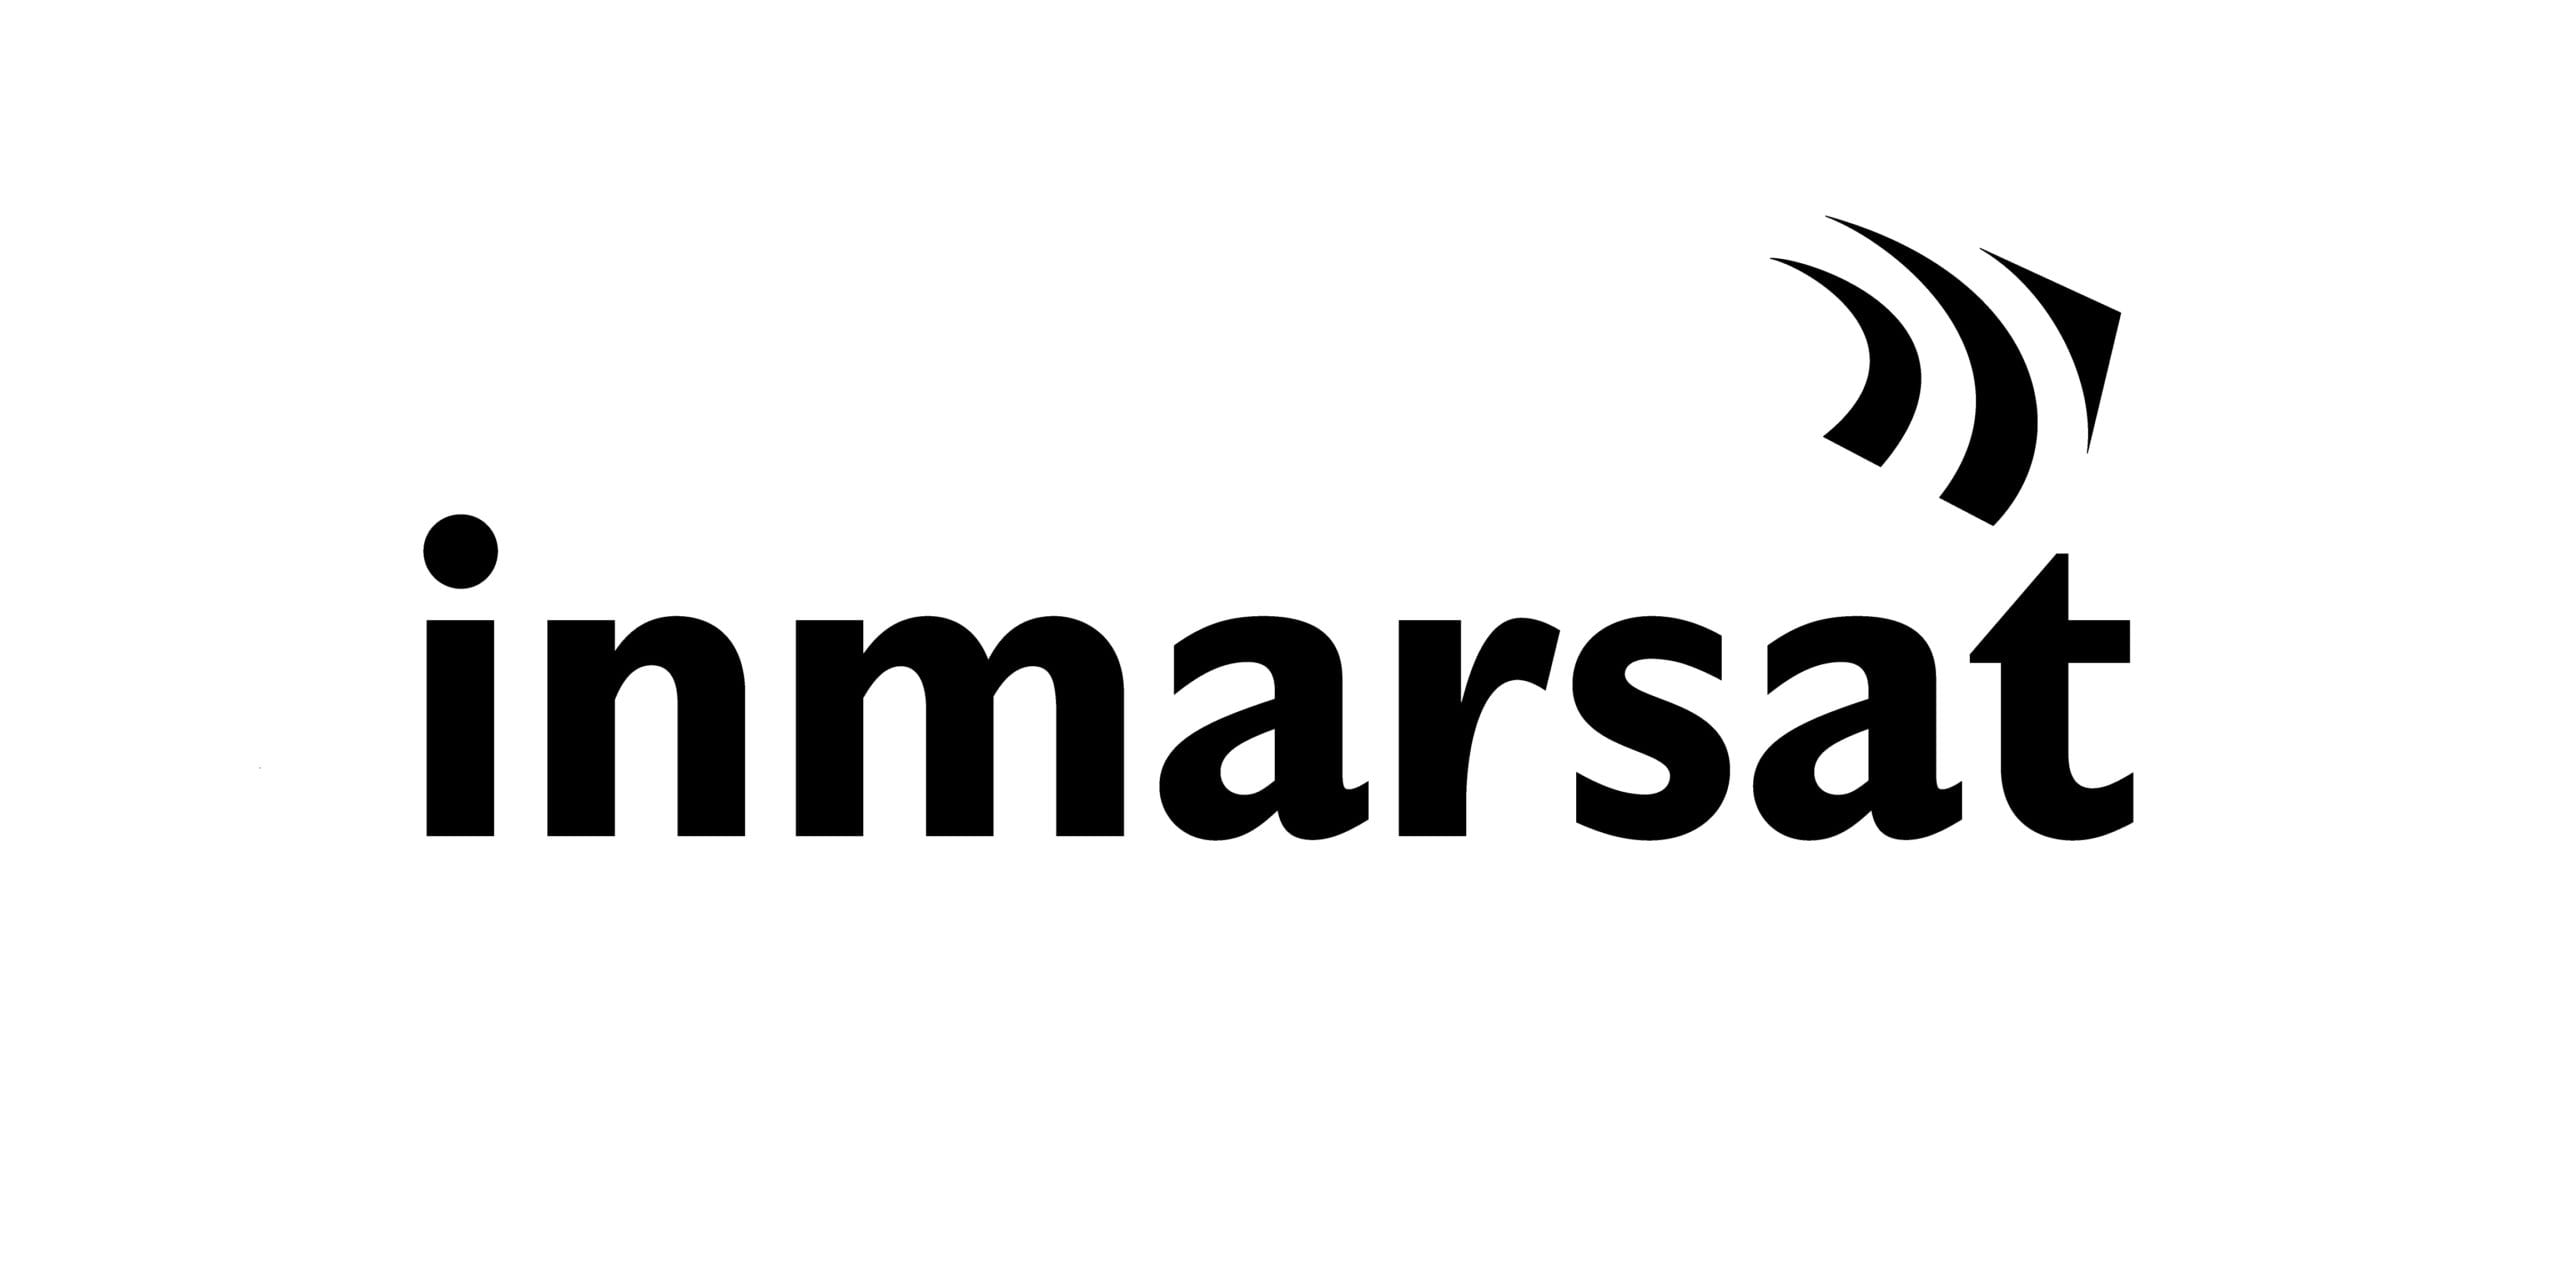 Speedcast Reaches Agreement with Inmarsat to Sell Primary Maritime Customer Contracts